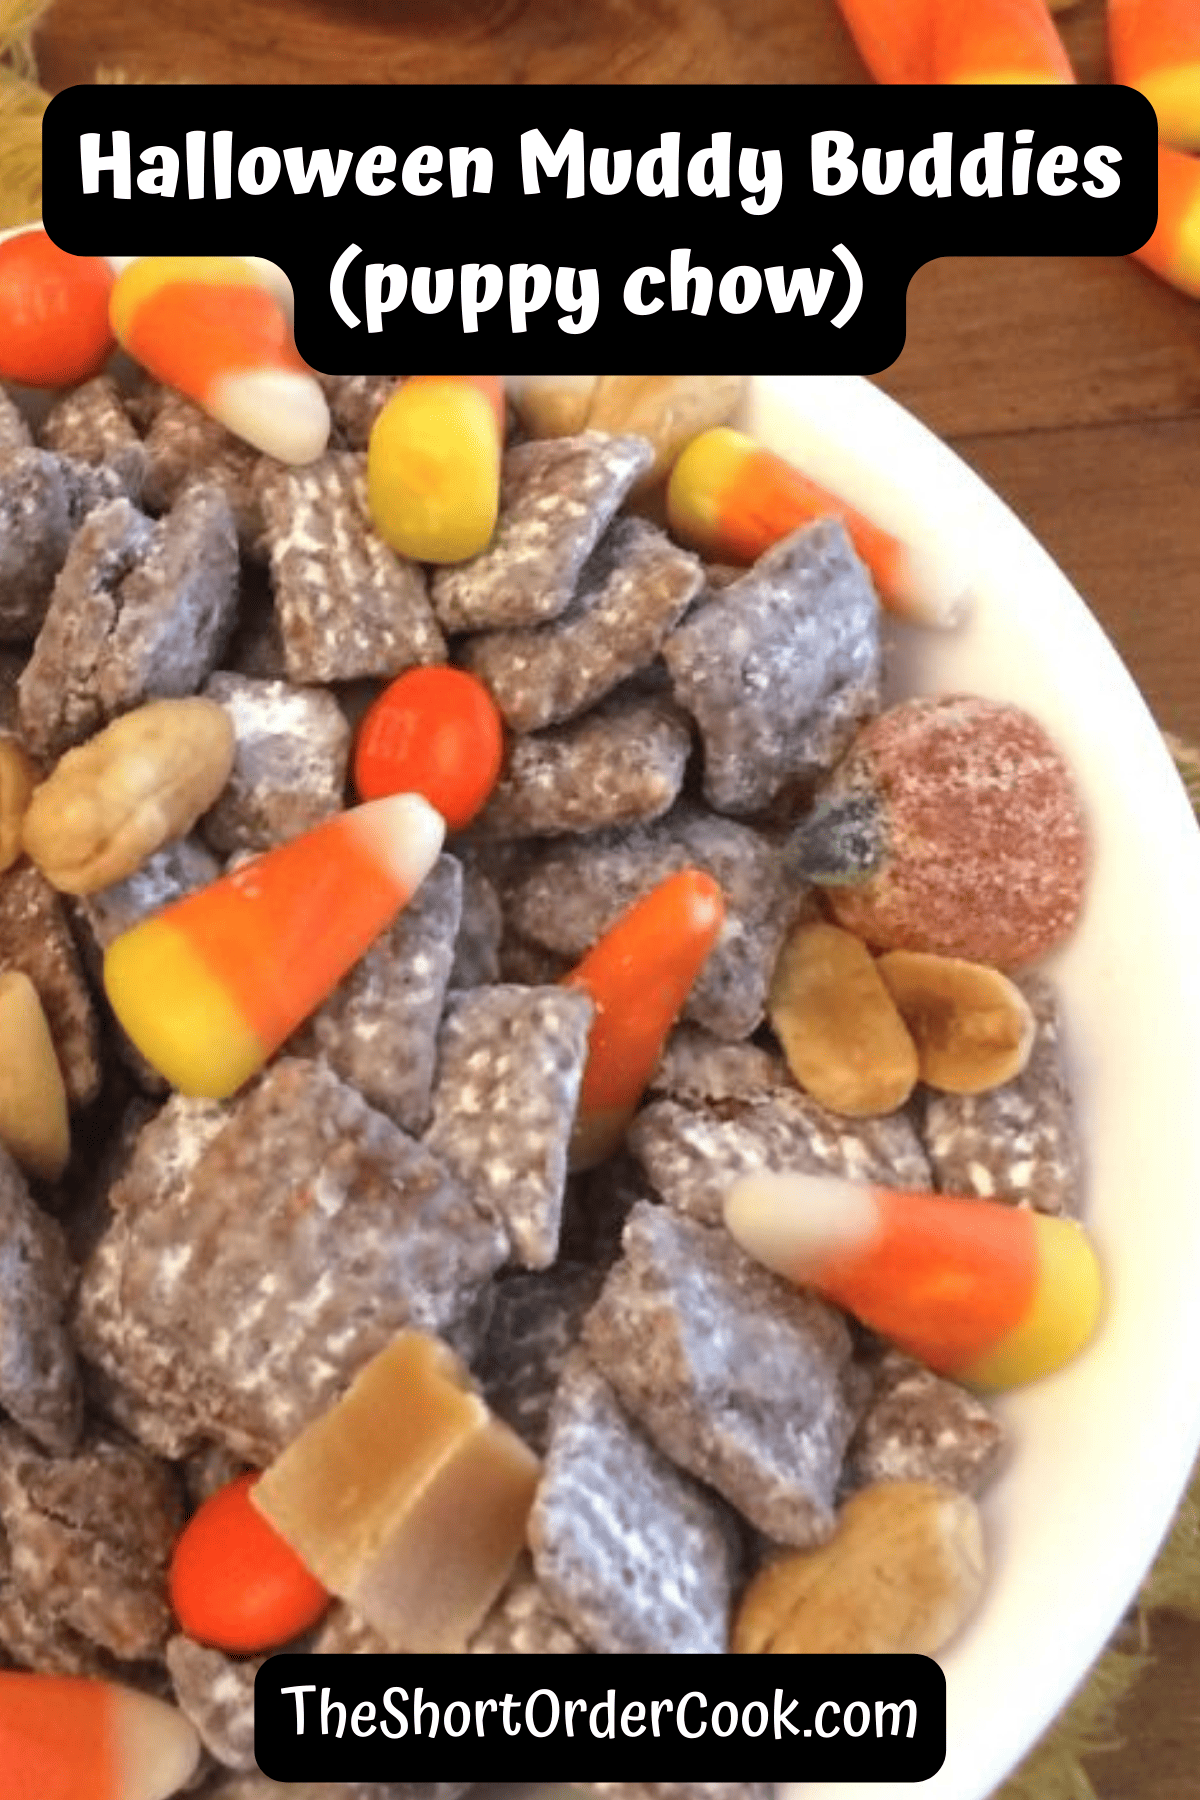 A bowl of peanut butter coated Chex cereal to make muddy buddies with Halloween candies.